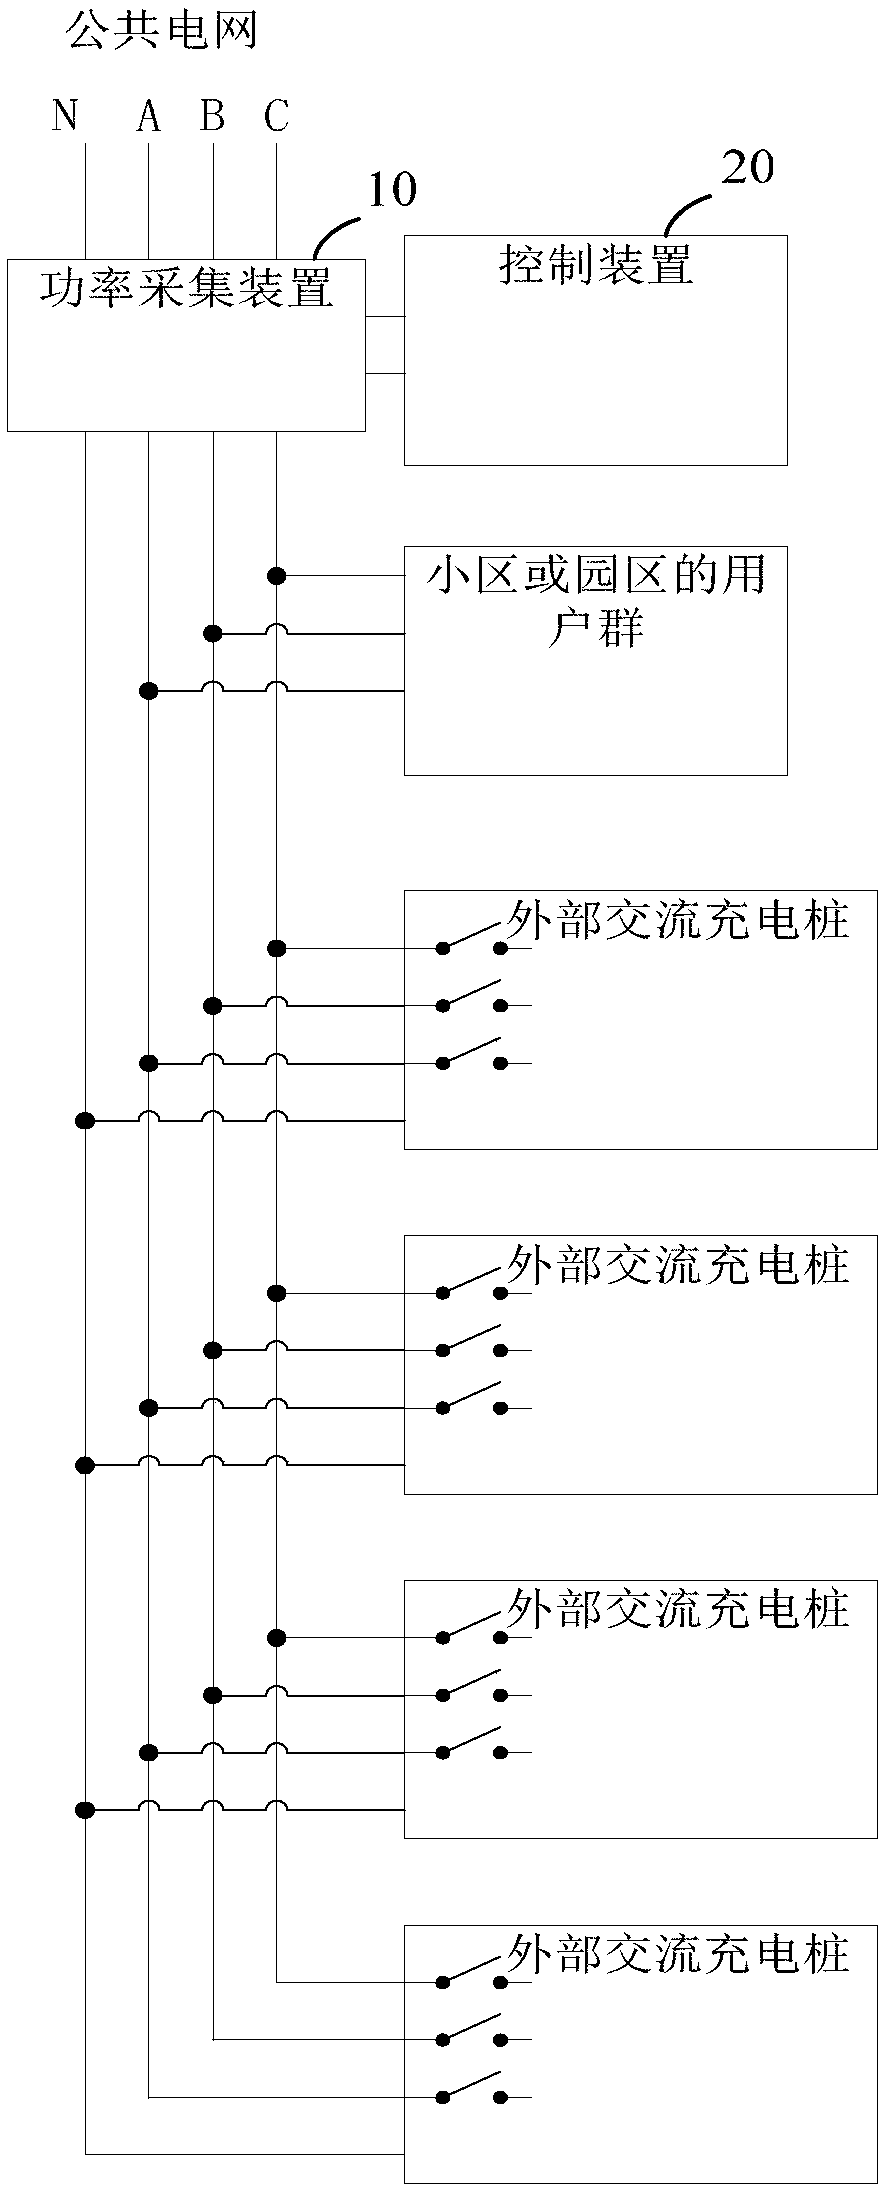 Electric vehicle intelligent alternating current charging system